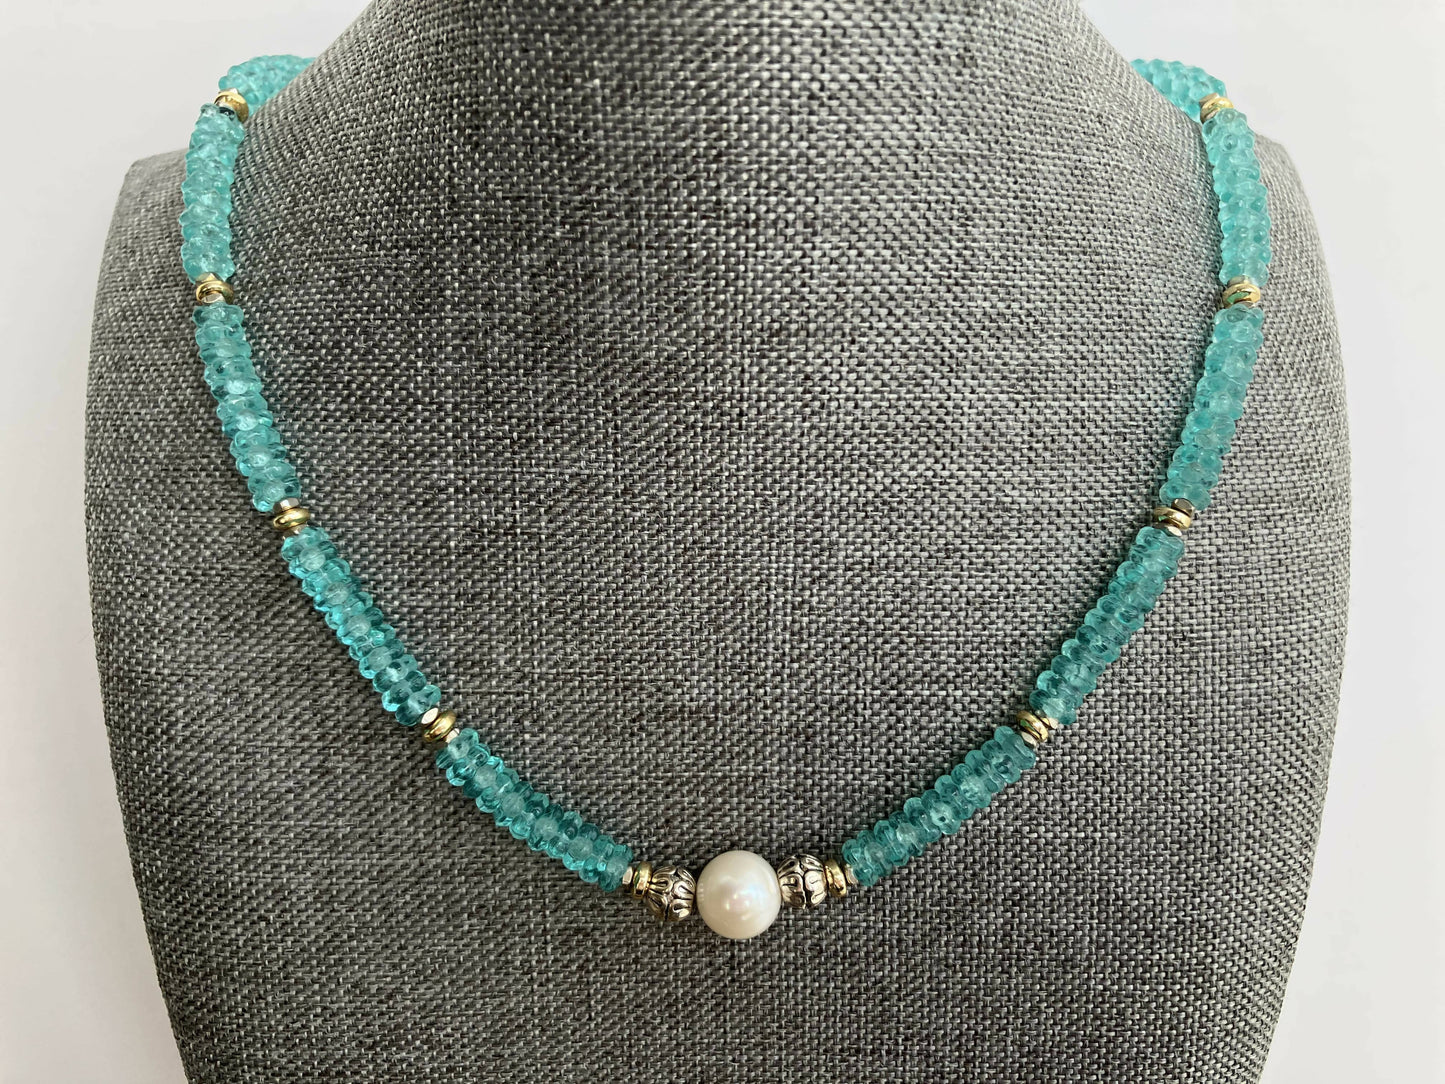 necklace - pearl, glass